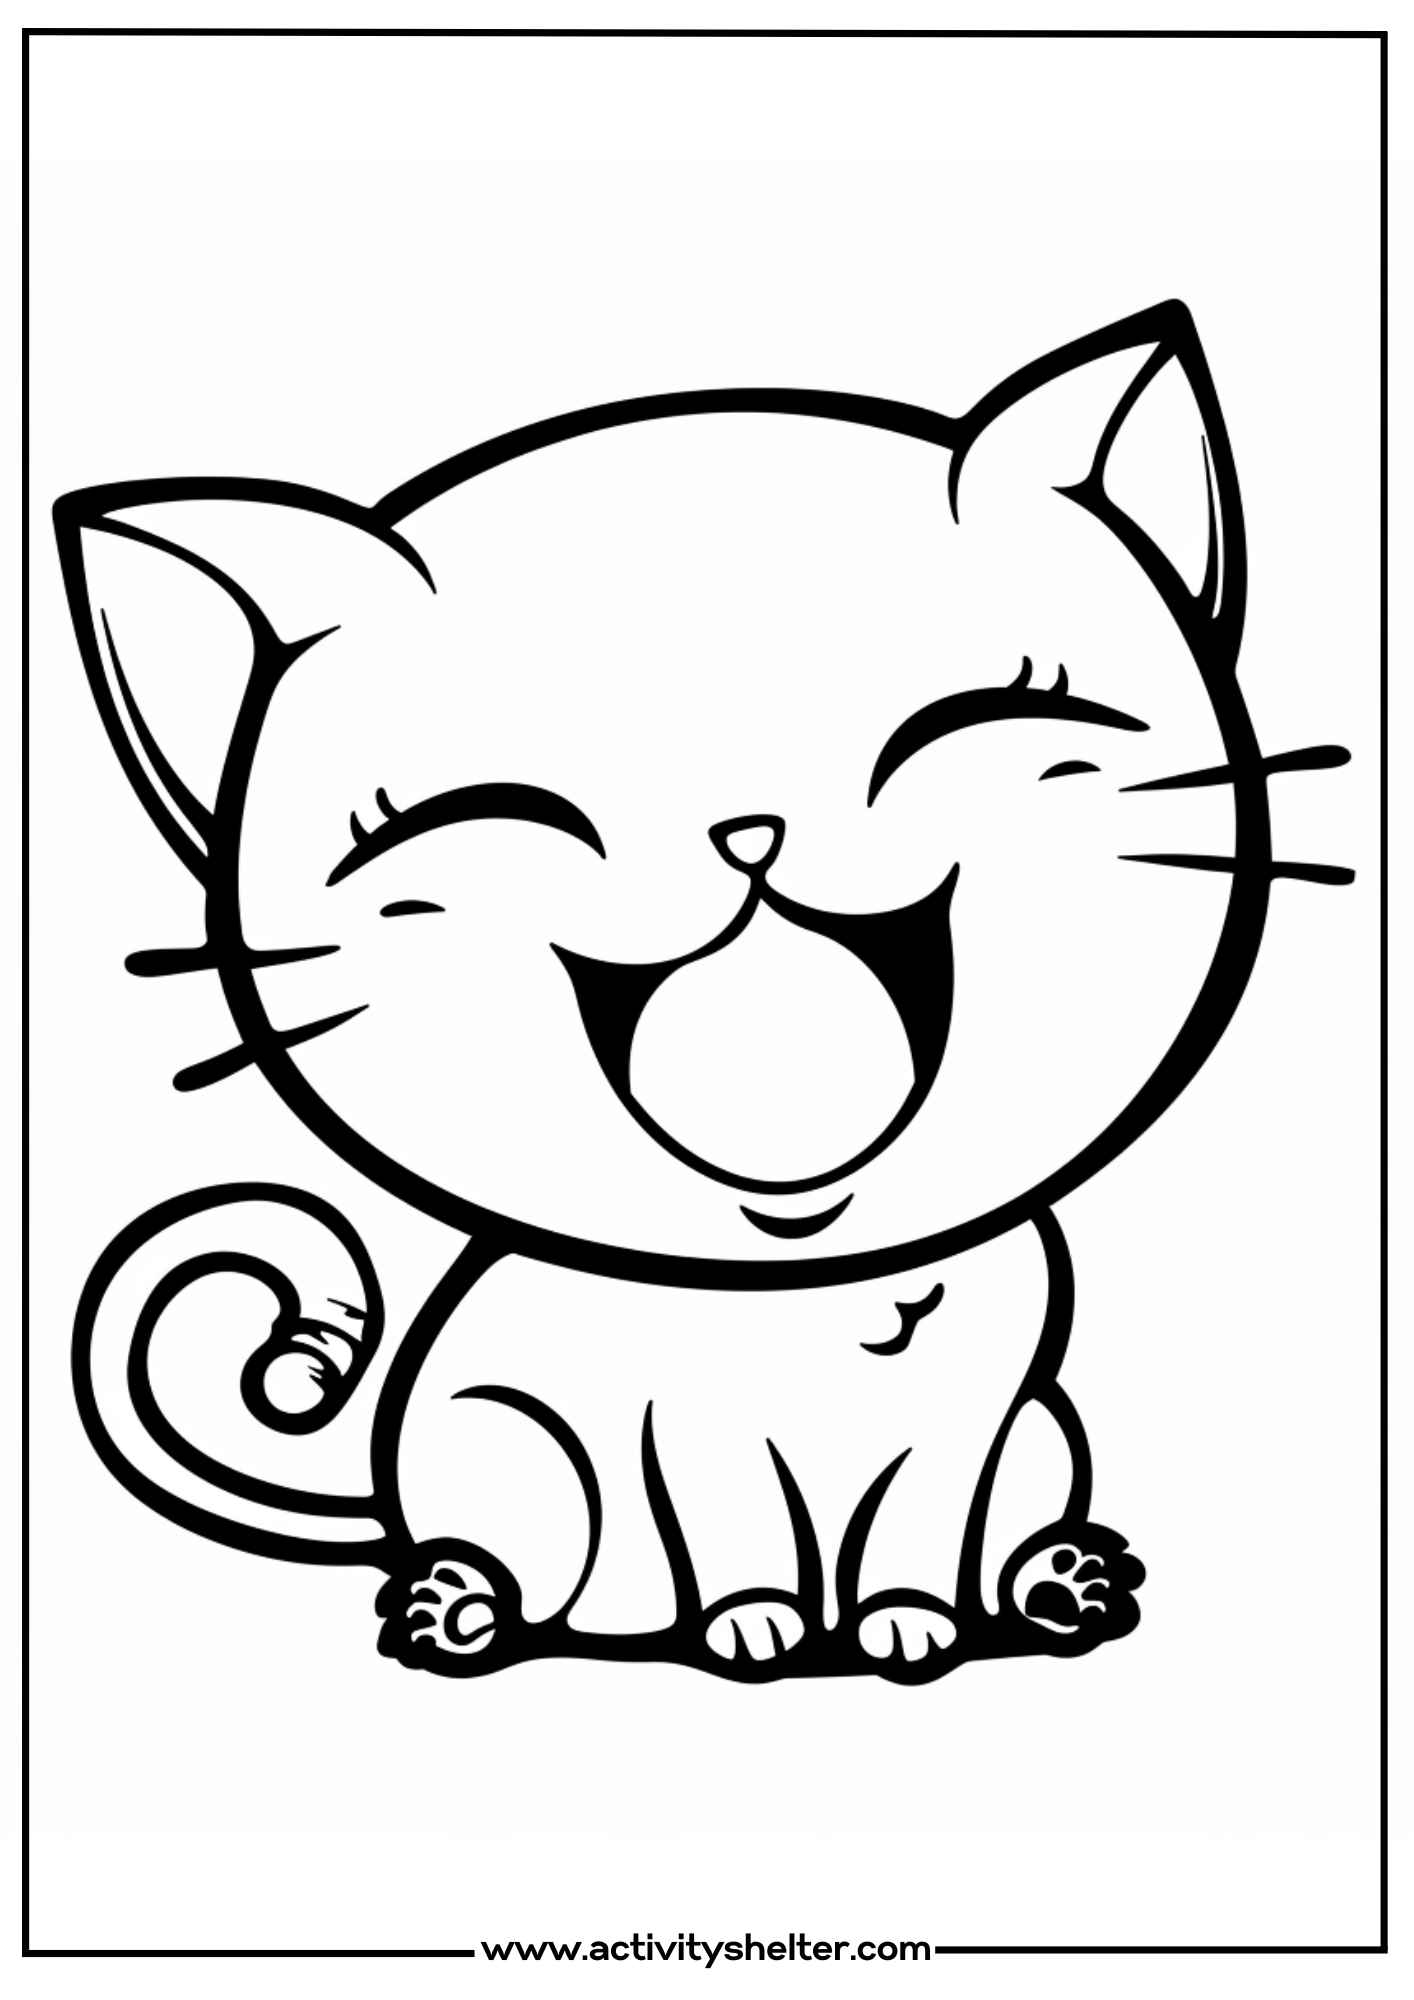 Adorable Laughing Kitten Coloring Pages